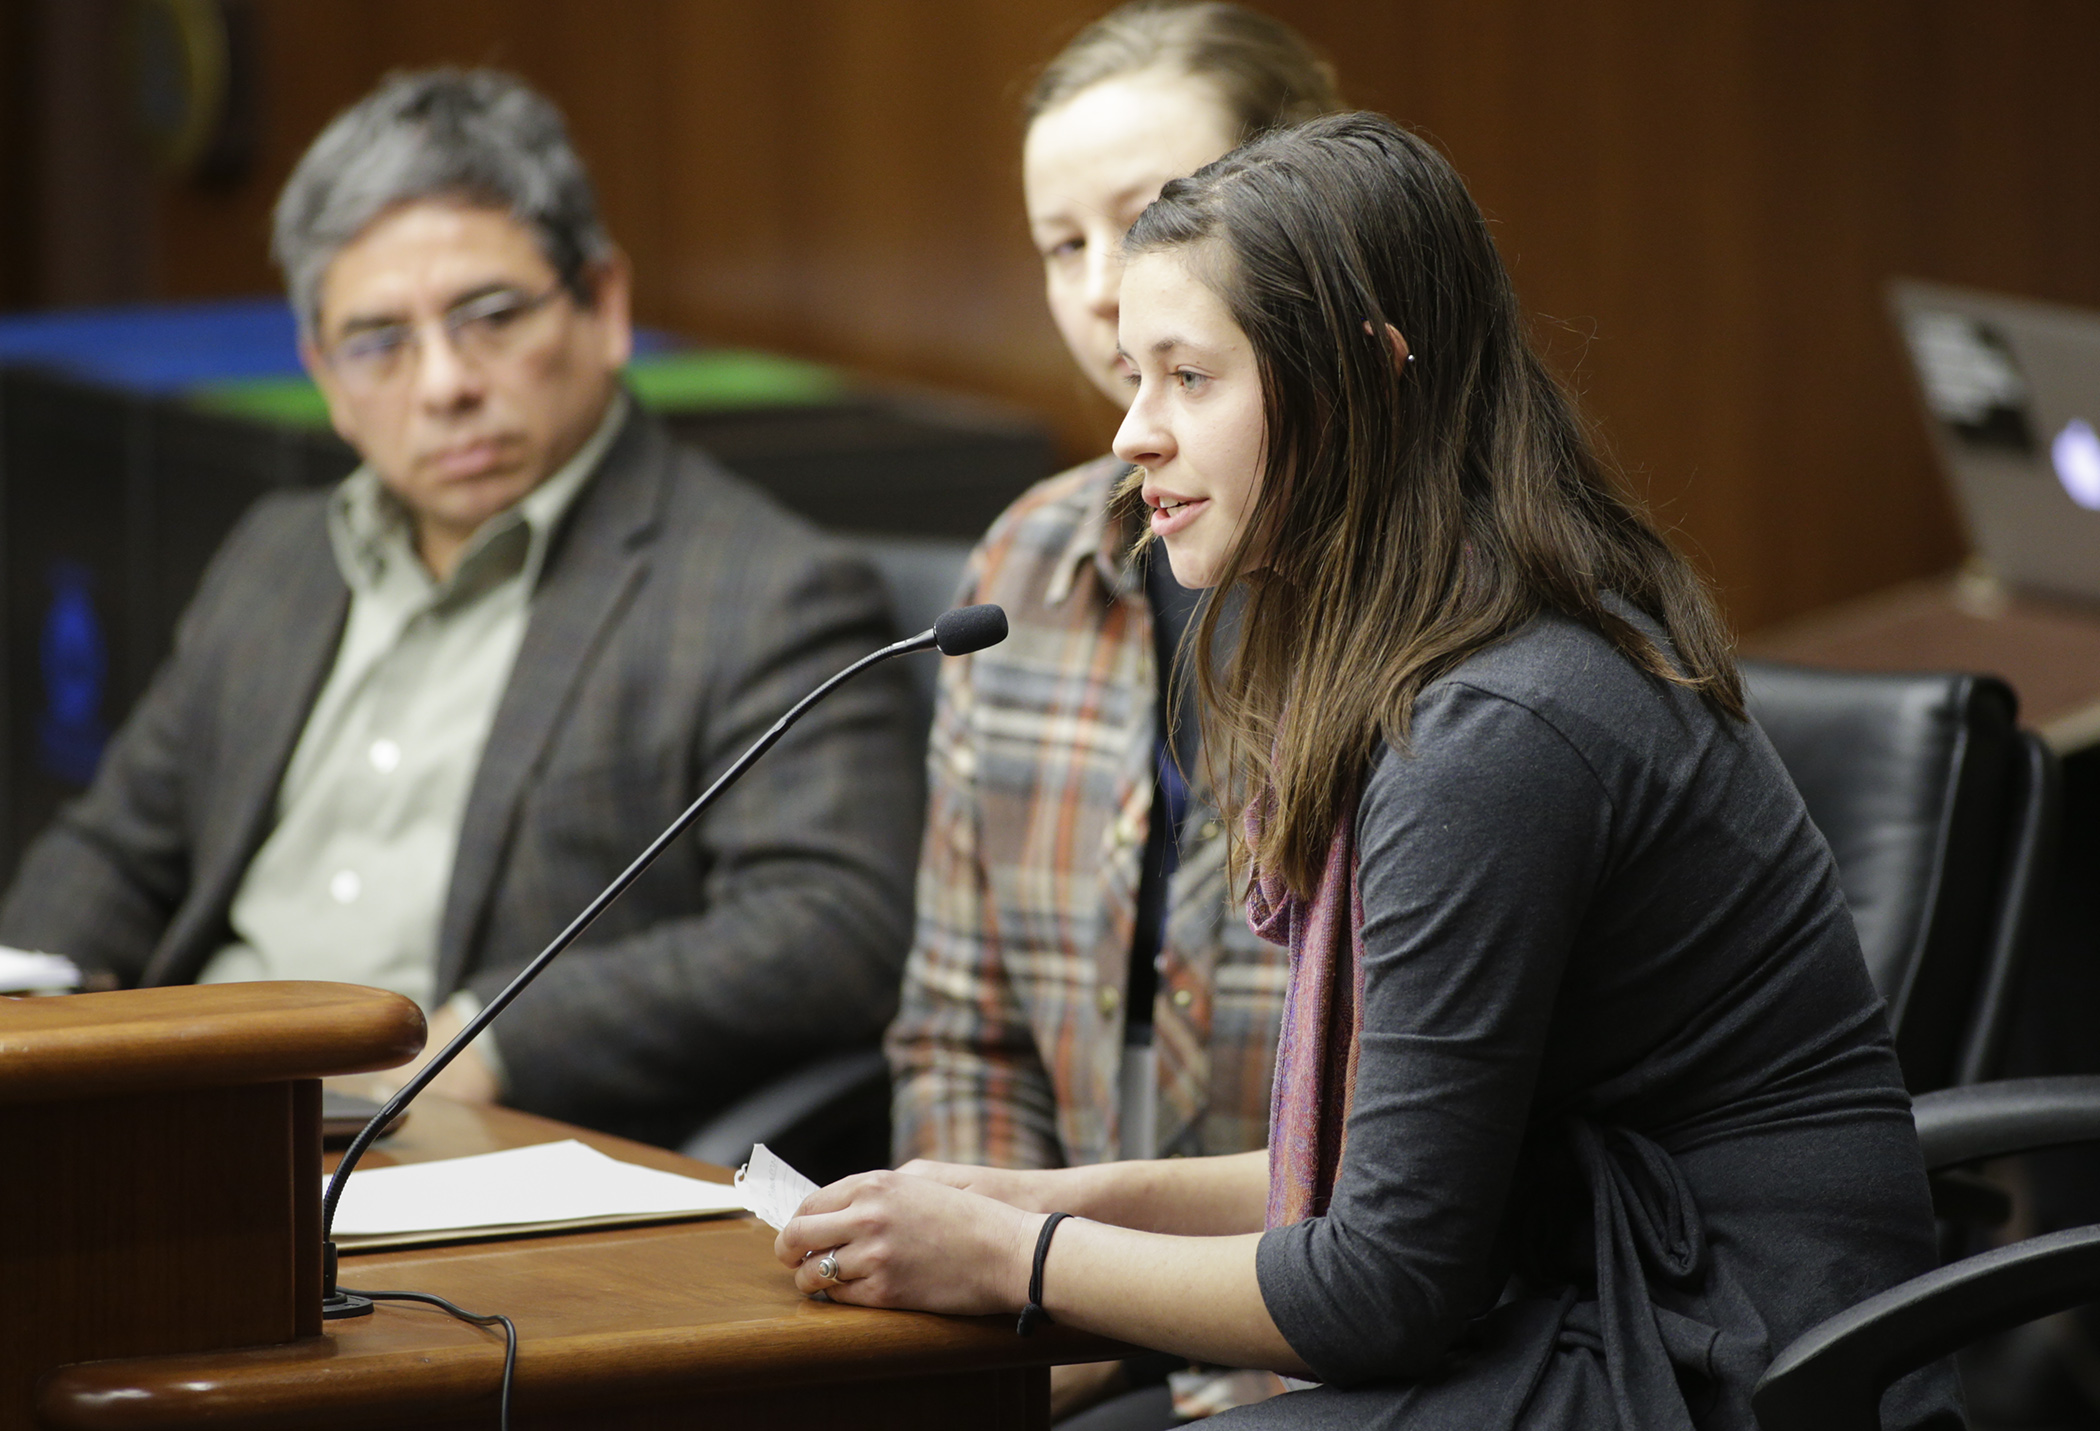 Rachel Sannerud, owner of the Pluck Flower Farm in Milaca, describes her experience as an emerging farmer during the Feb. 13 meeting of the House Agriculture and Food Finance and Policy Division. Photo by Paul Battaglia